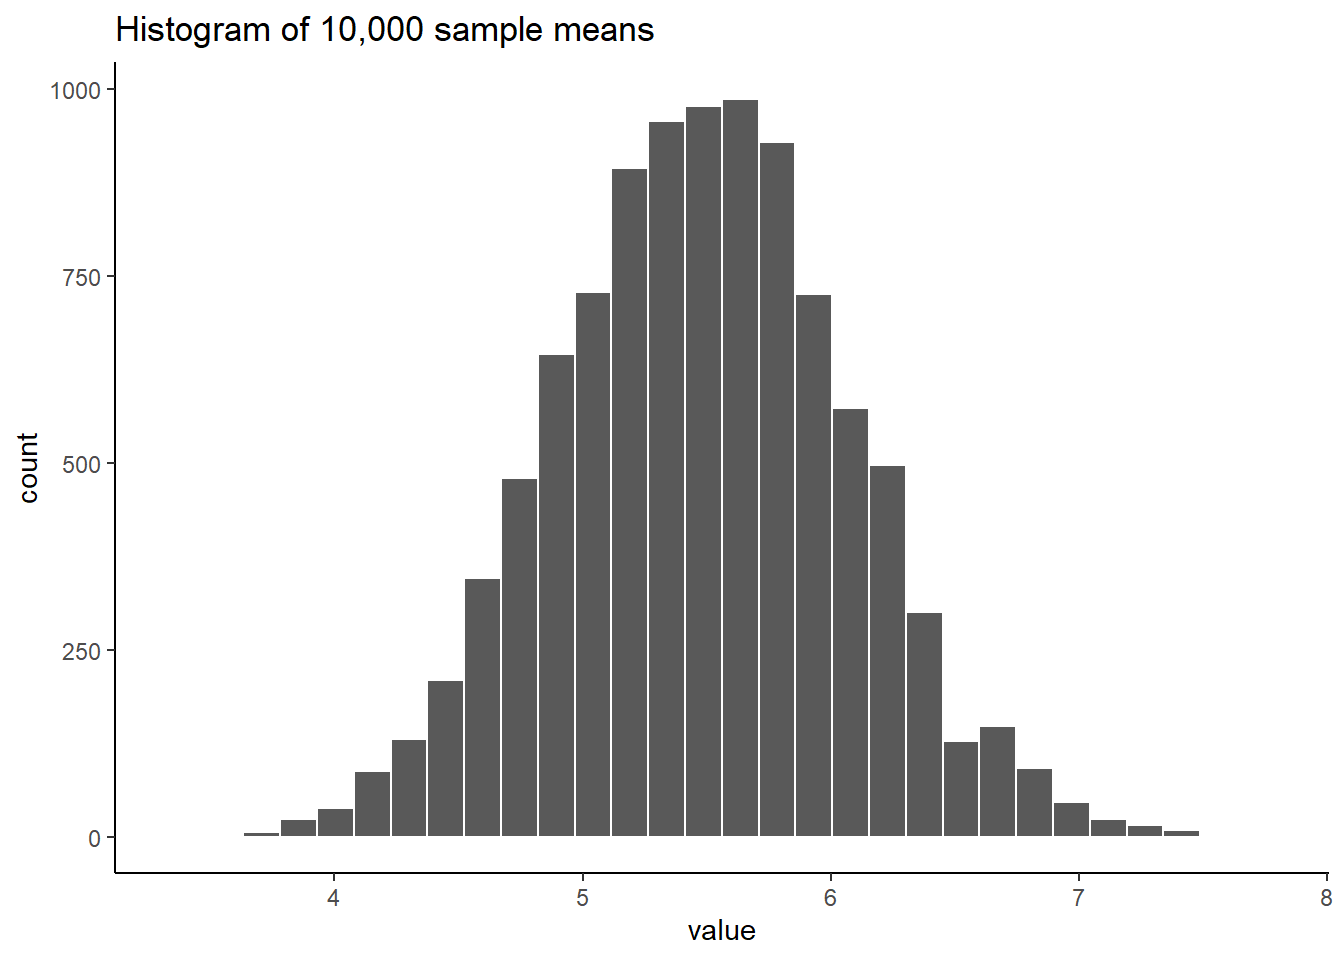 A histogram showing the sample means for 10,000 samples, each size 20, from the uniform distribution of numbers from 1 to 10. The expected mean is 5.5, and the histogram is centered on 5.5. The mean of each sample is not always 5.5 because of sampling error or chance